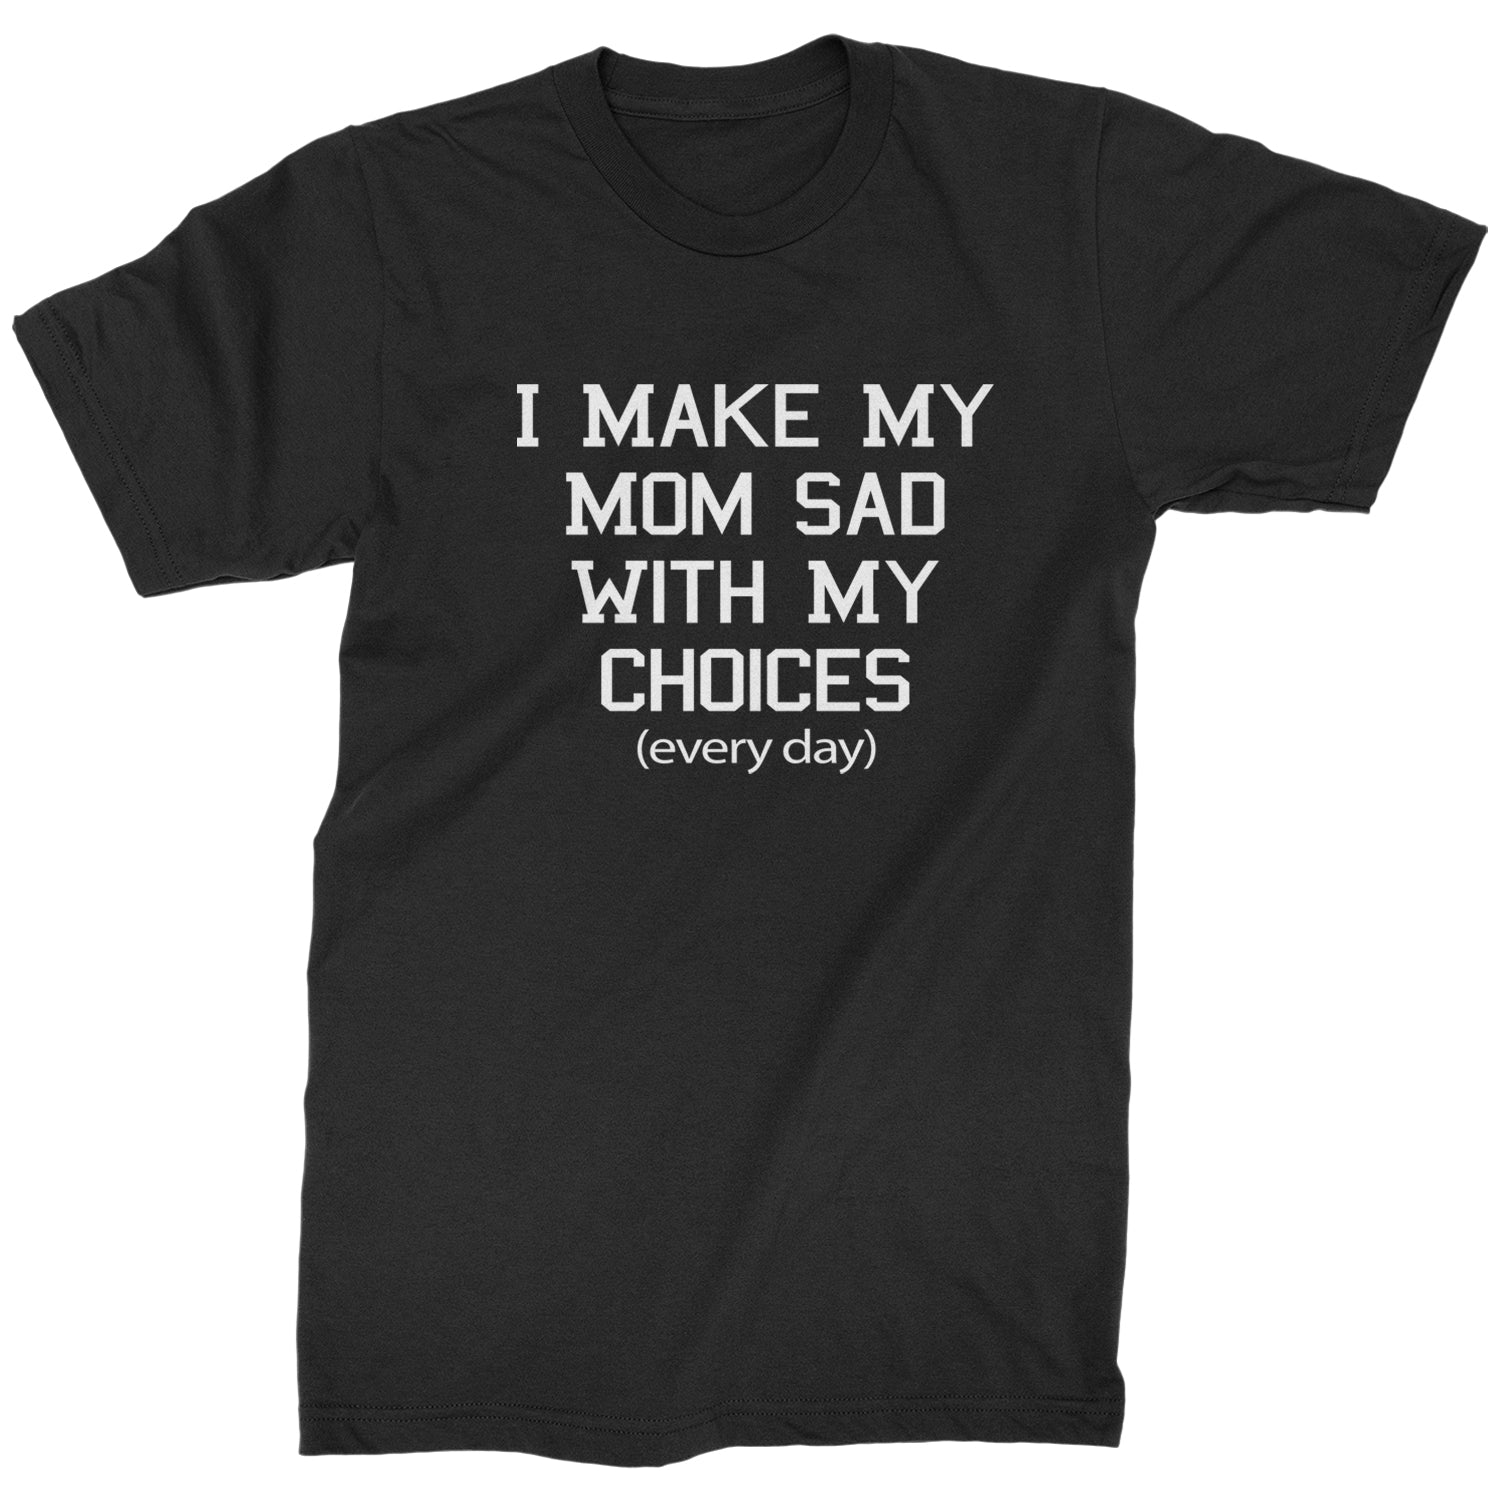 I Make My Mom Sad With My Choices Every Day Mens T-shirt funny, ironic, meme by Expression Tees